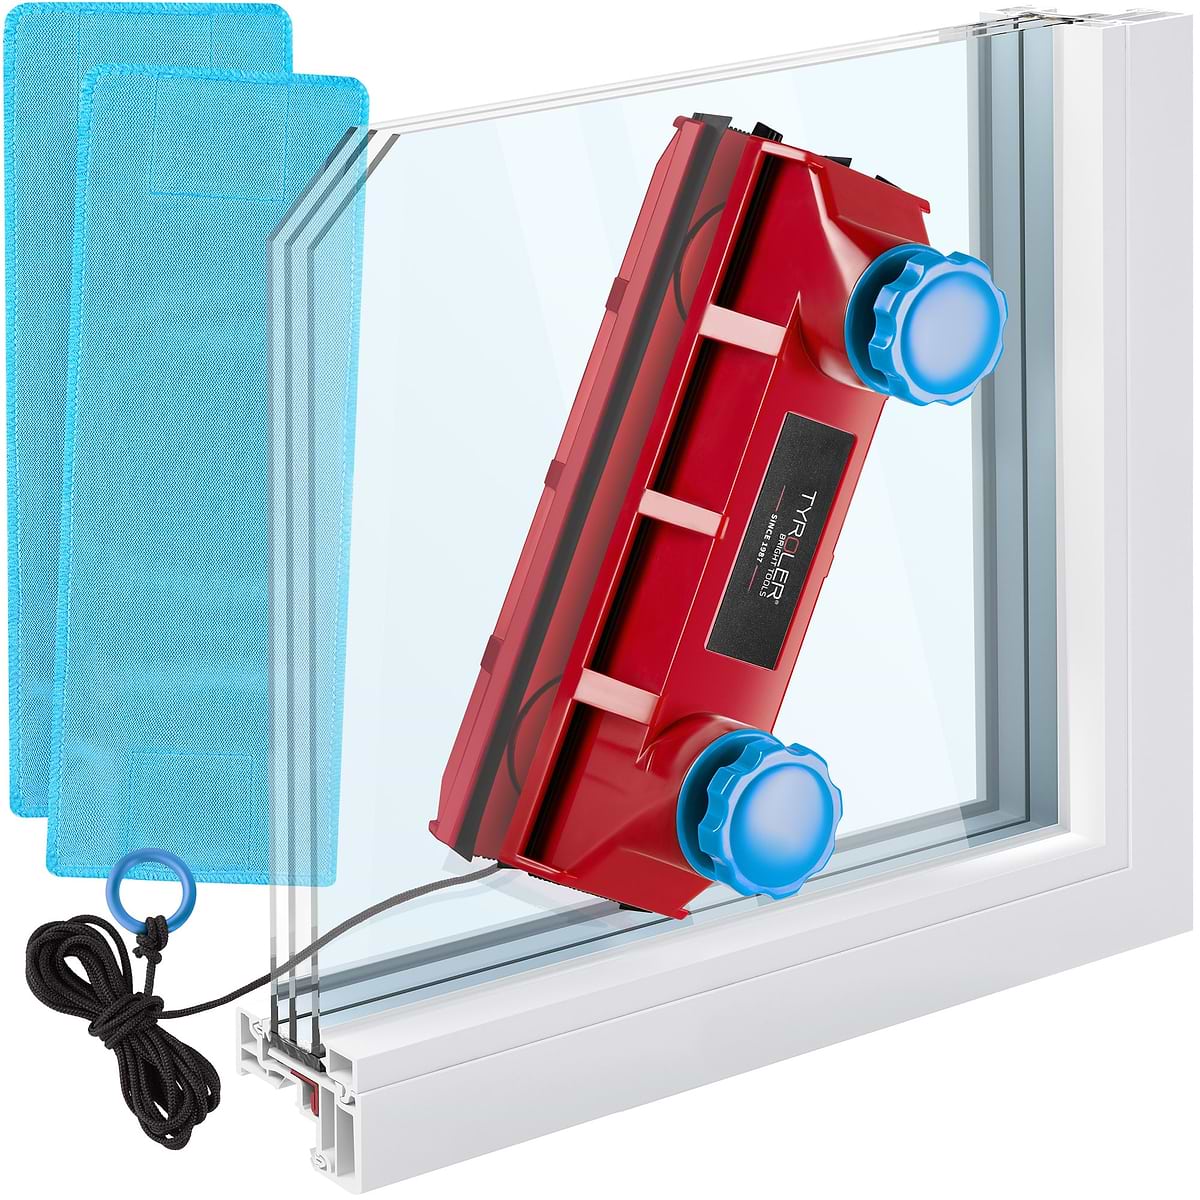 Magnetic Window Cleaner by Tyroler